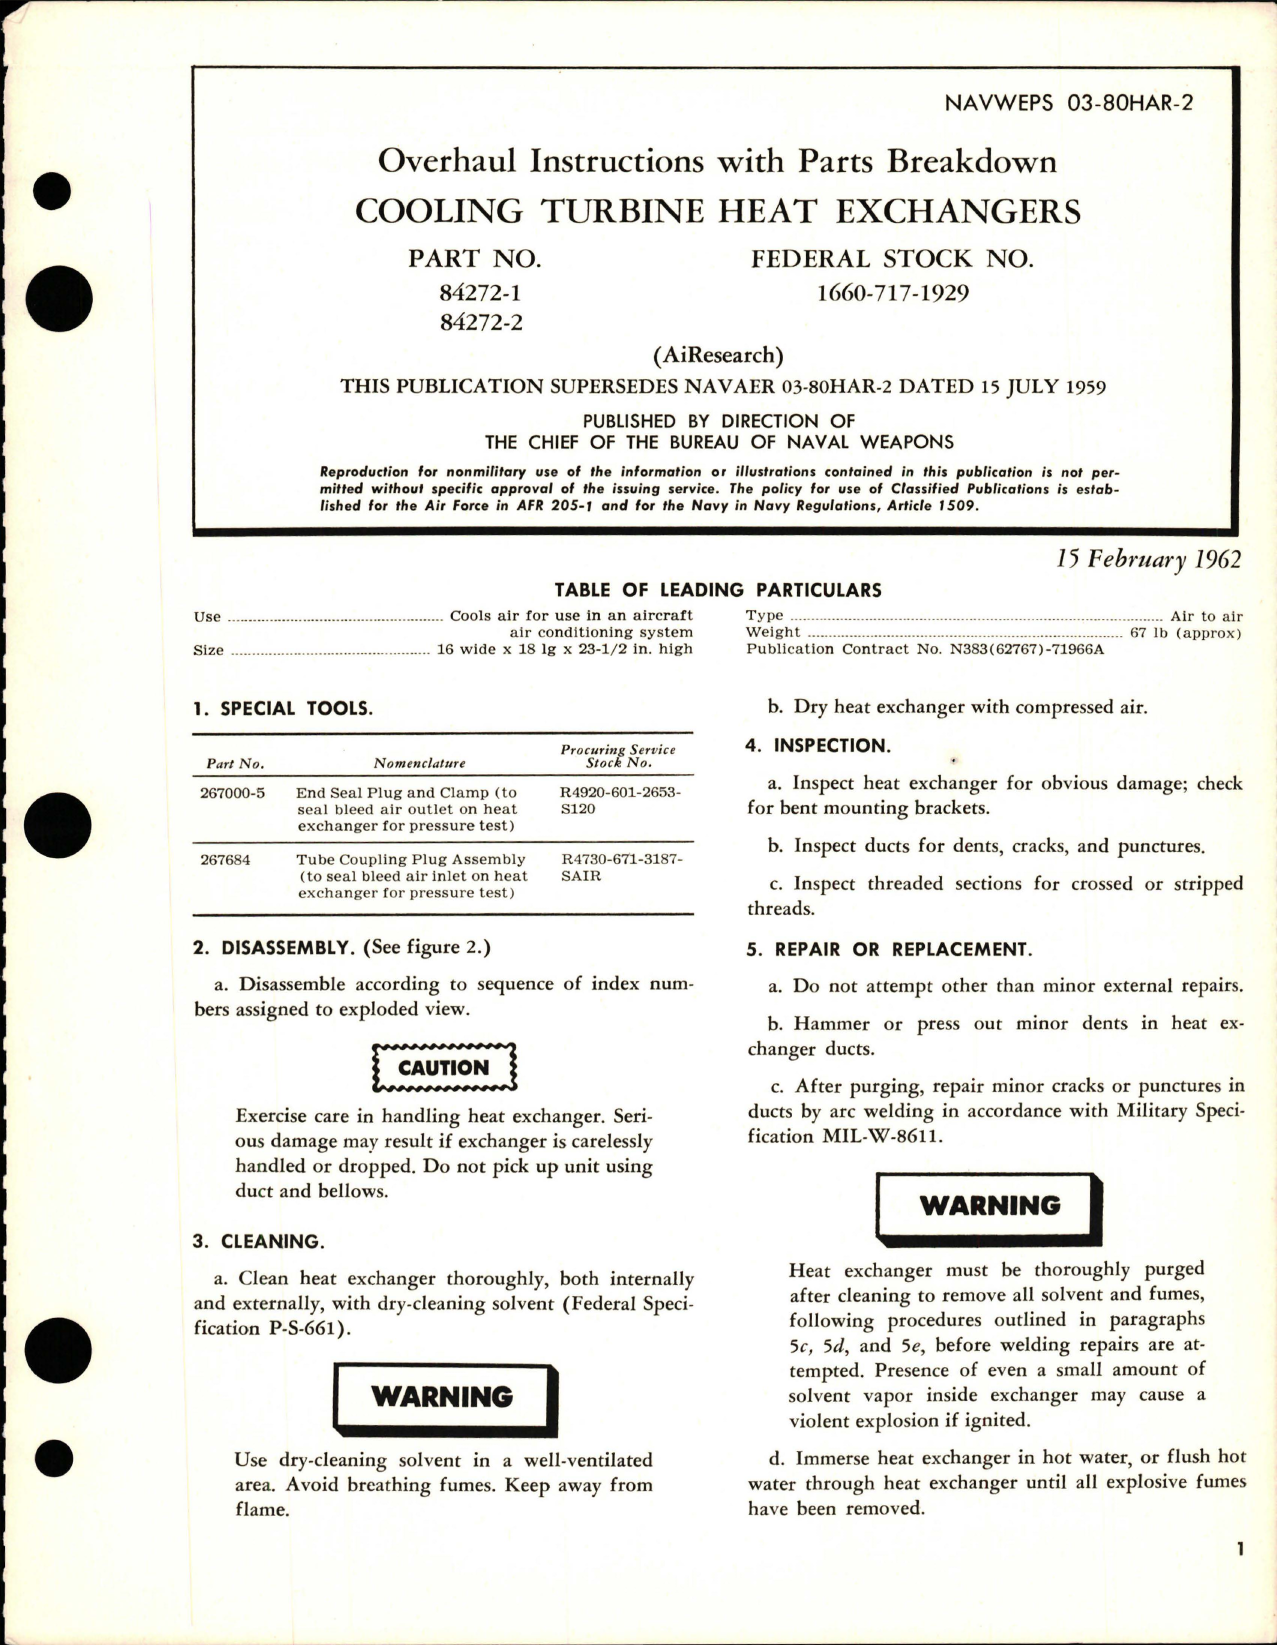 Sample page 1 from AirCorps Library document: Overhaul Instructions with Parts Breakdown for Cooling Turbine Heat Exchangers - Parts 84272-1 and 84272-2 